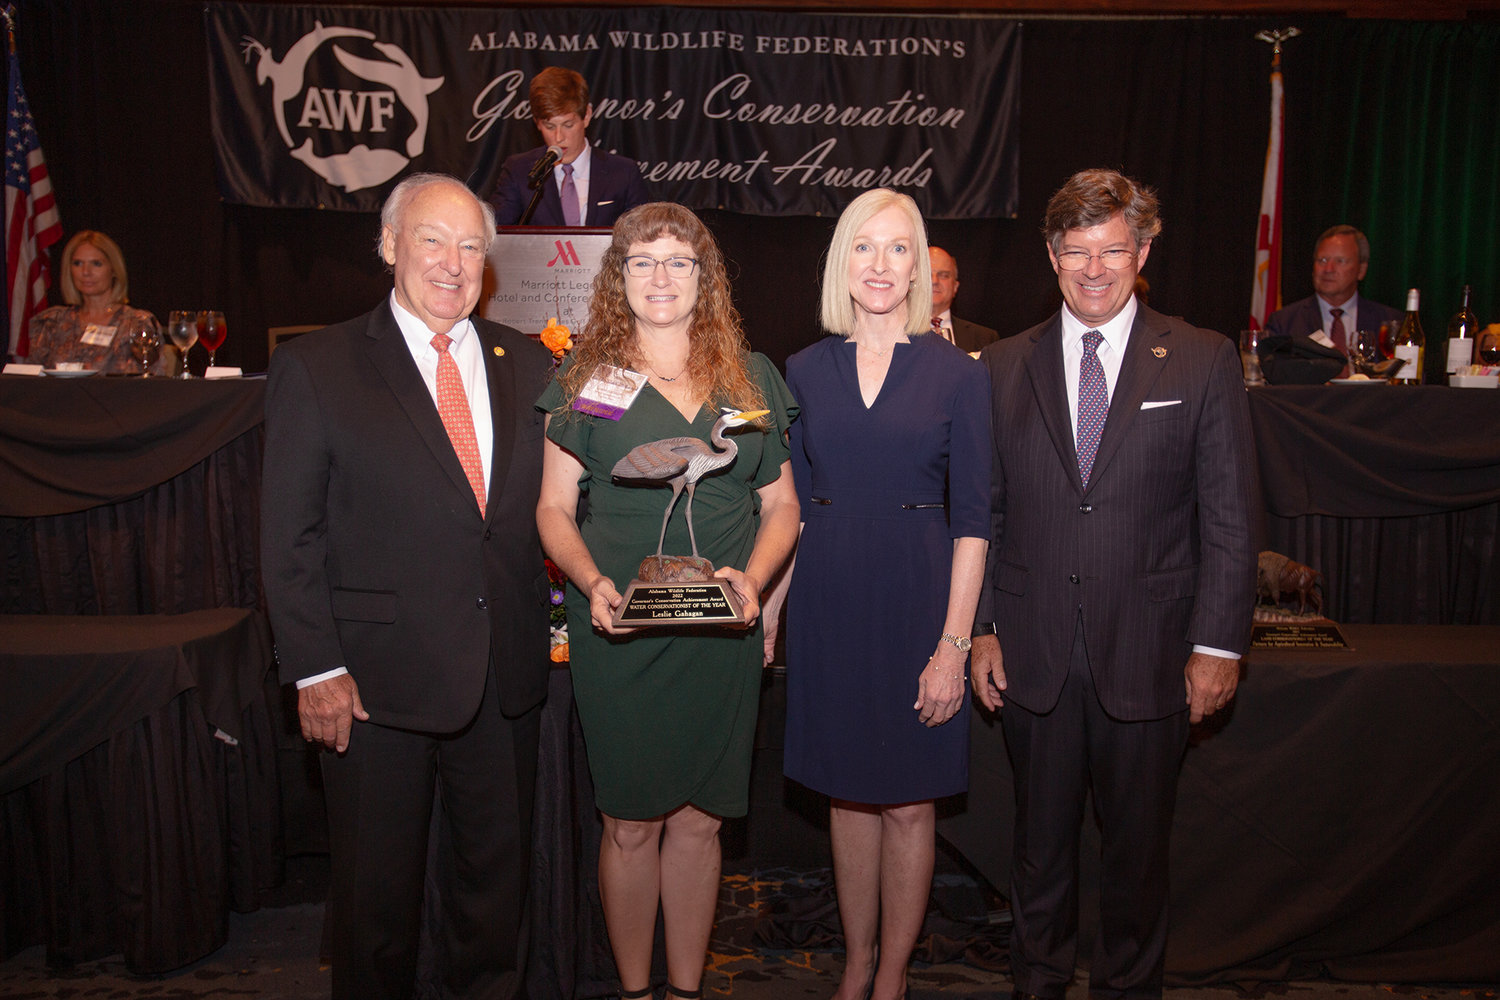 Presenting the award was Horace Horn with PowerSouth Energy; Susan Comensky with Alabama Power Company; and Jesse Vogtle, AWF President.